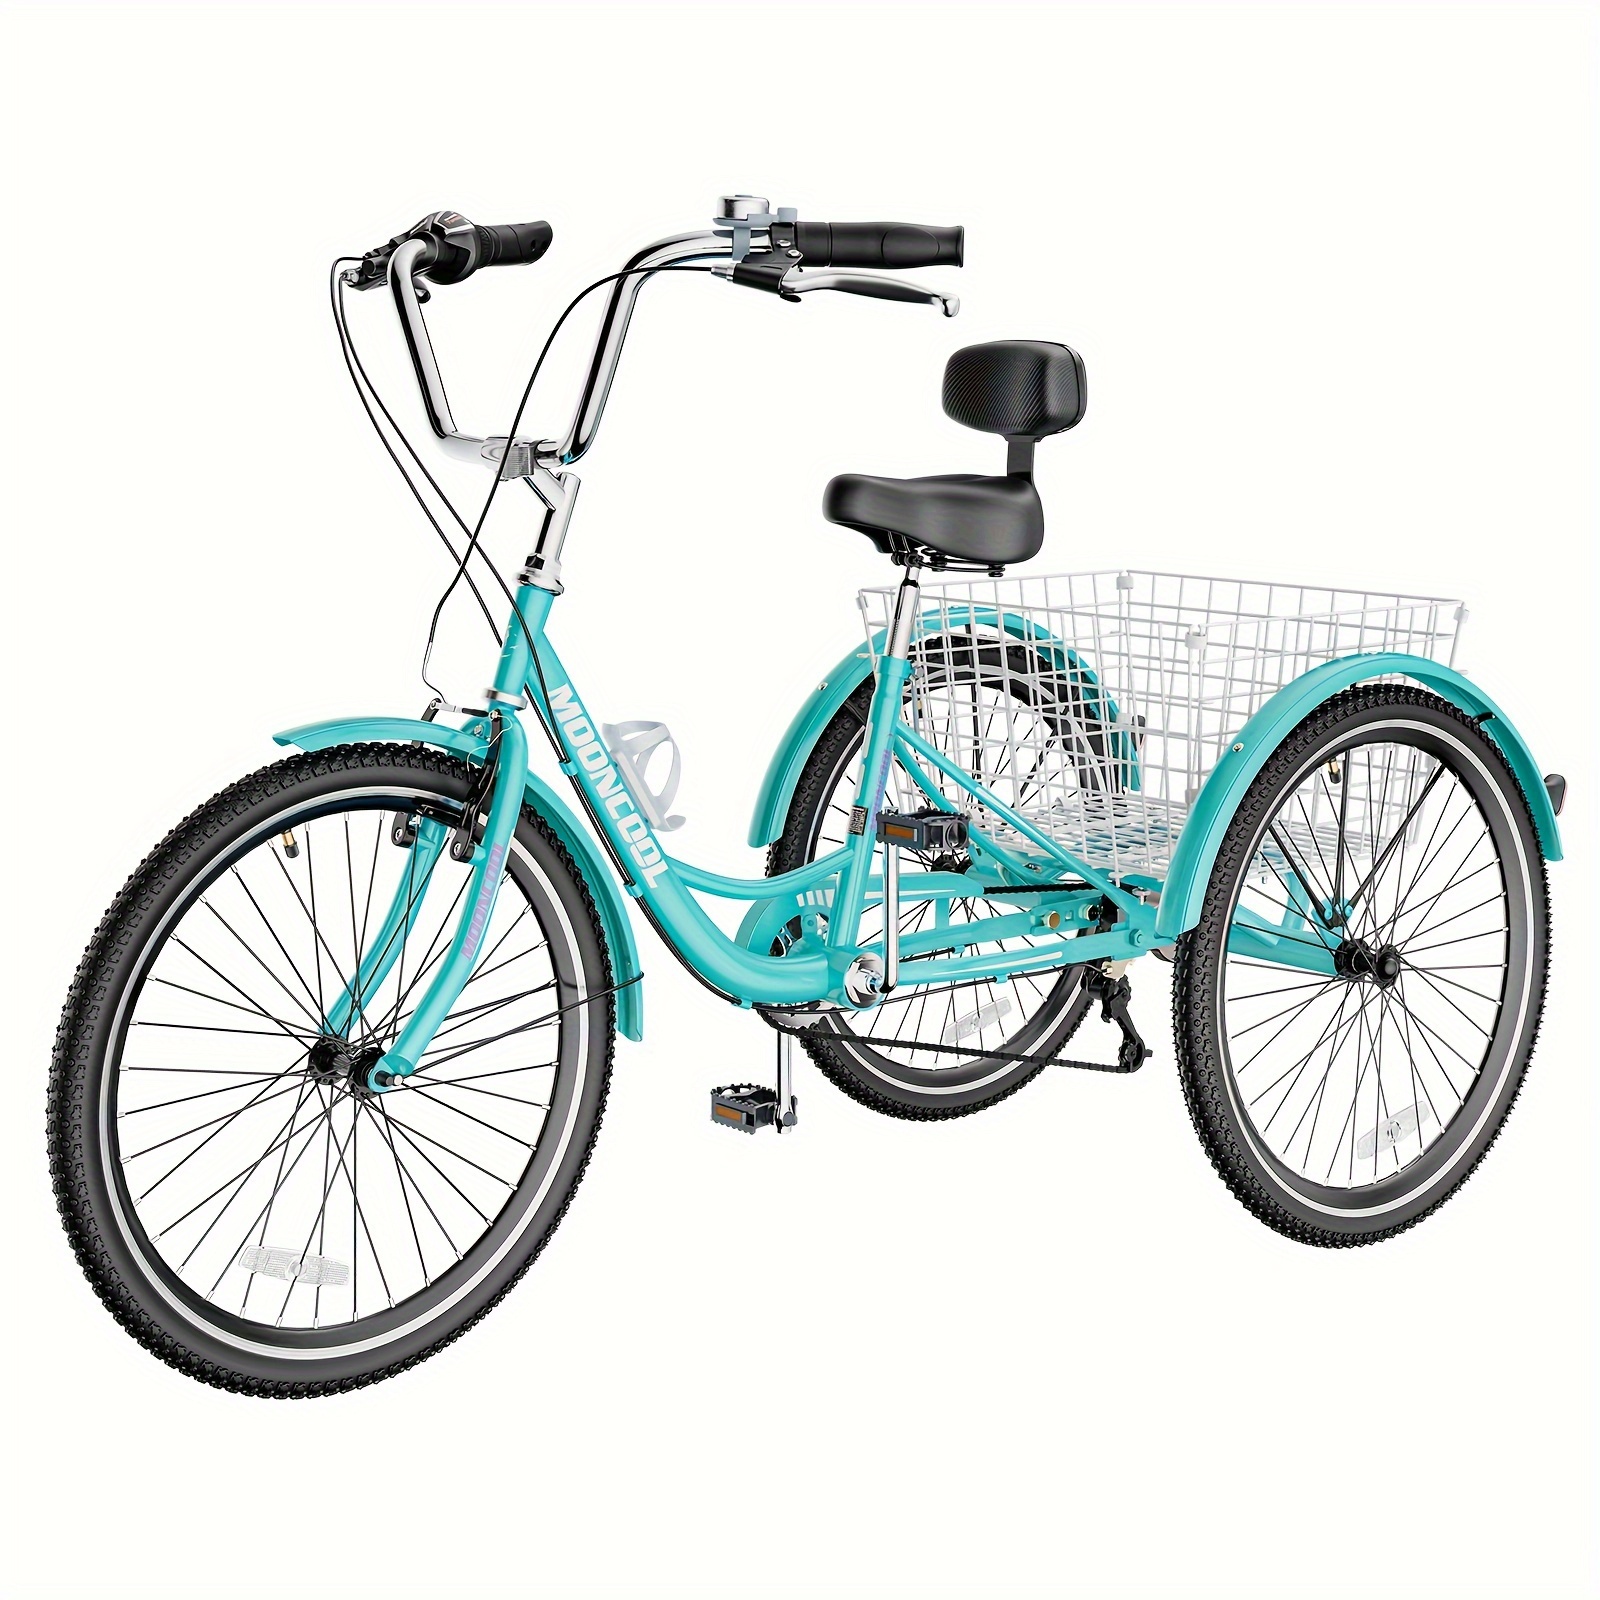 

Adult Tricycle 24" 7 Speed Cruise Trike With Large Basket For Men Women Seniors 3 Wheel Bikes For Exercise Shopping Picnic Outdoor Activities